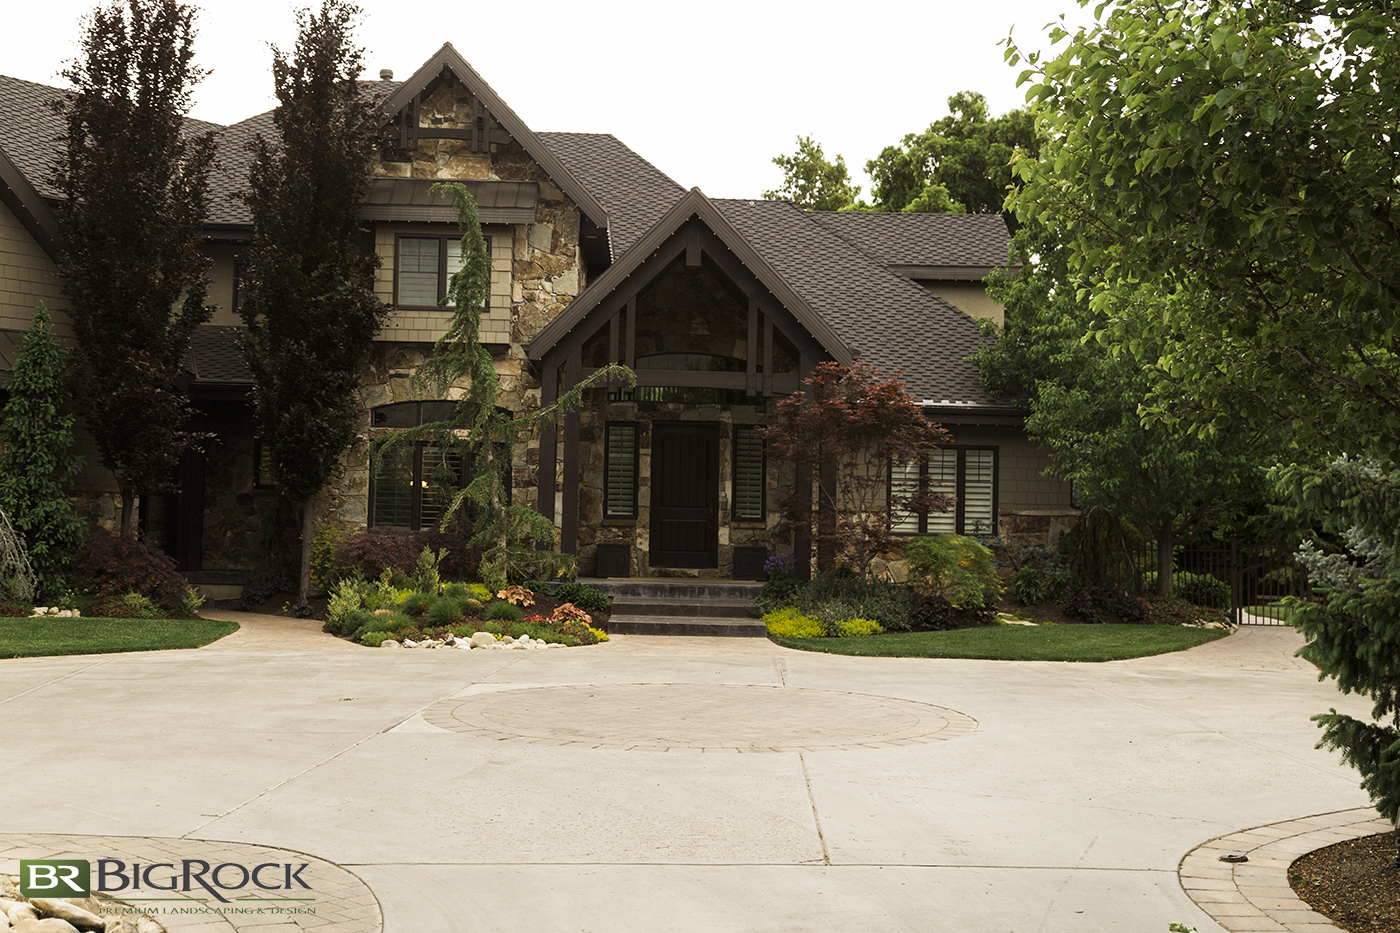 Add beautiful stone work and designs to large cement areas for landscaping design interest.